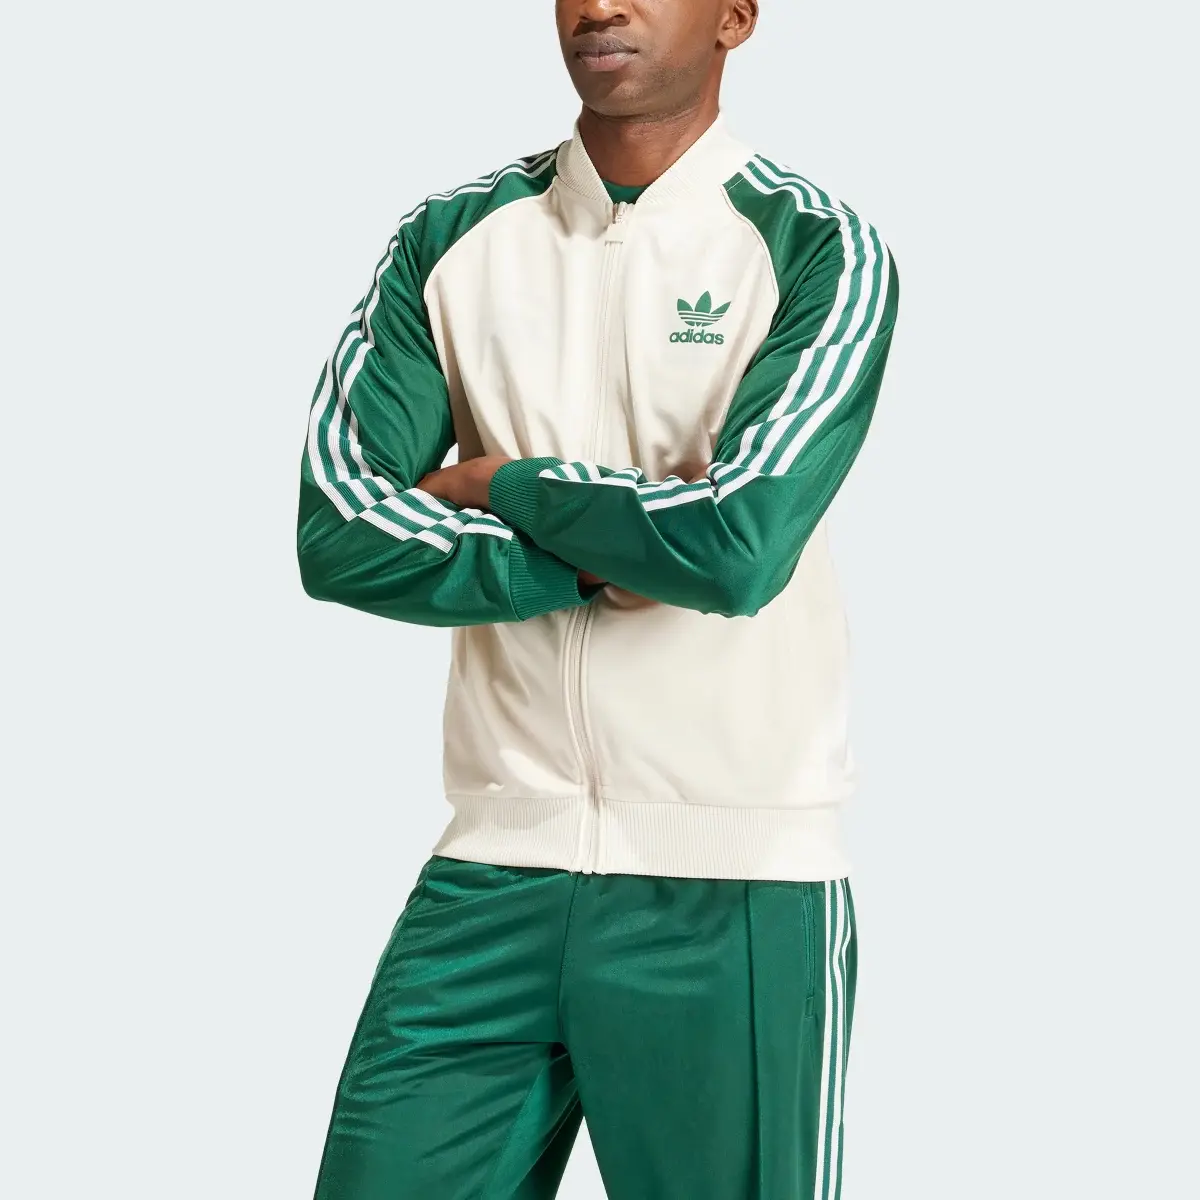 Adidas SST Track Top. 1